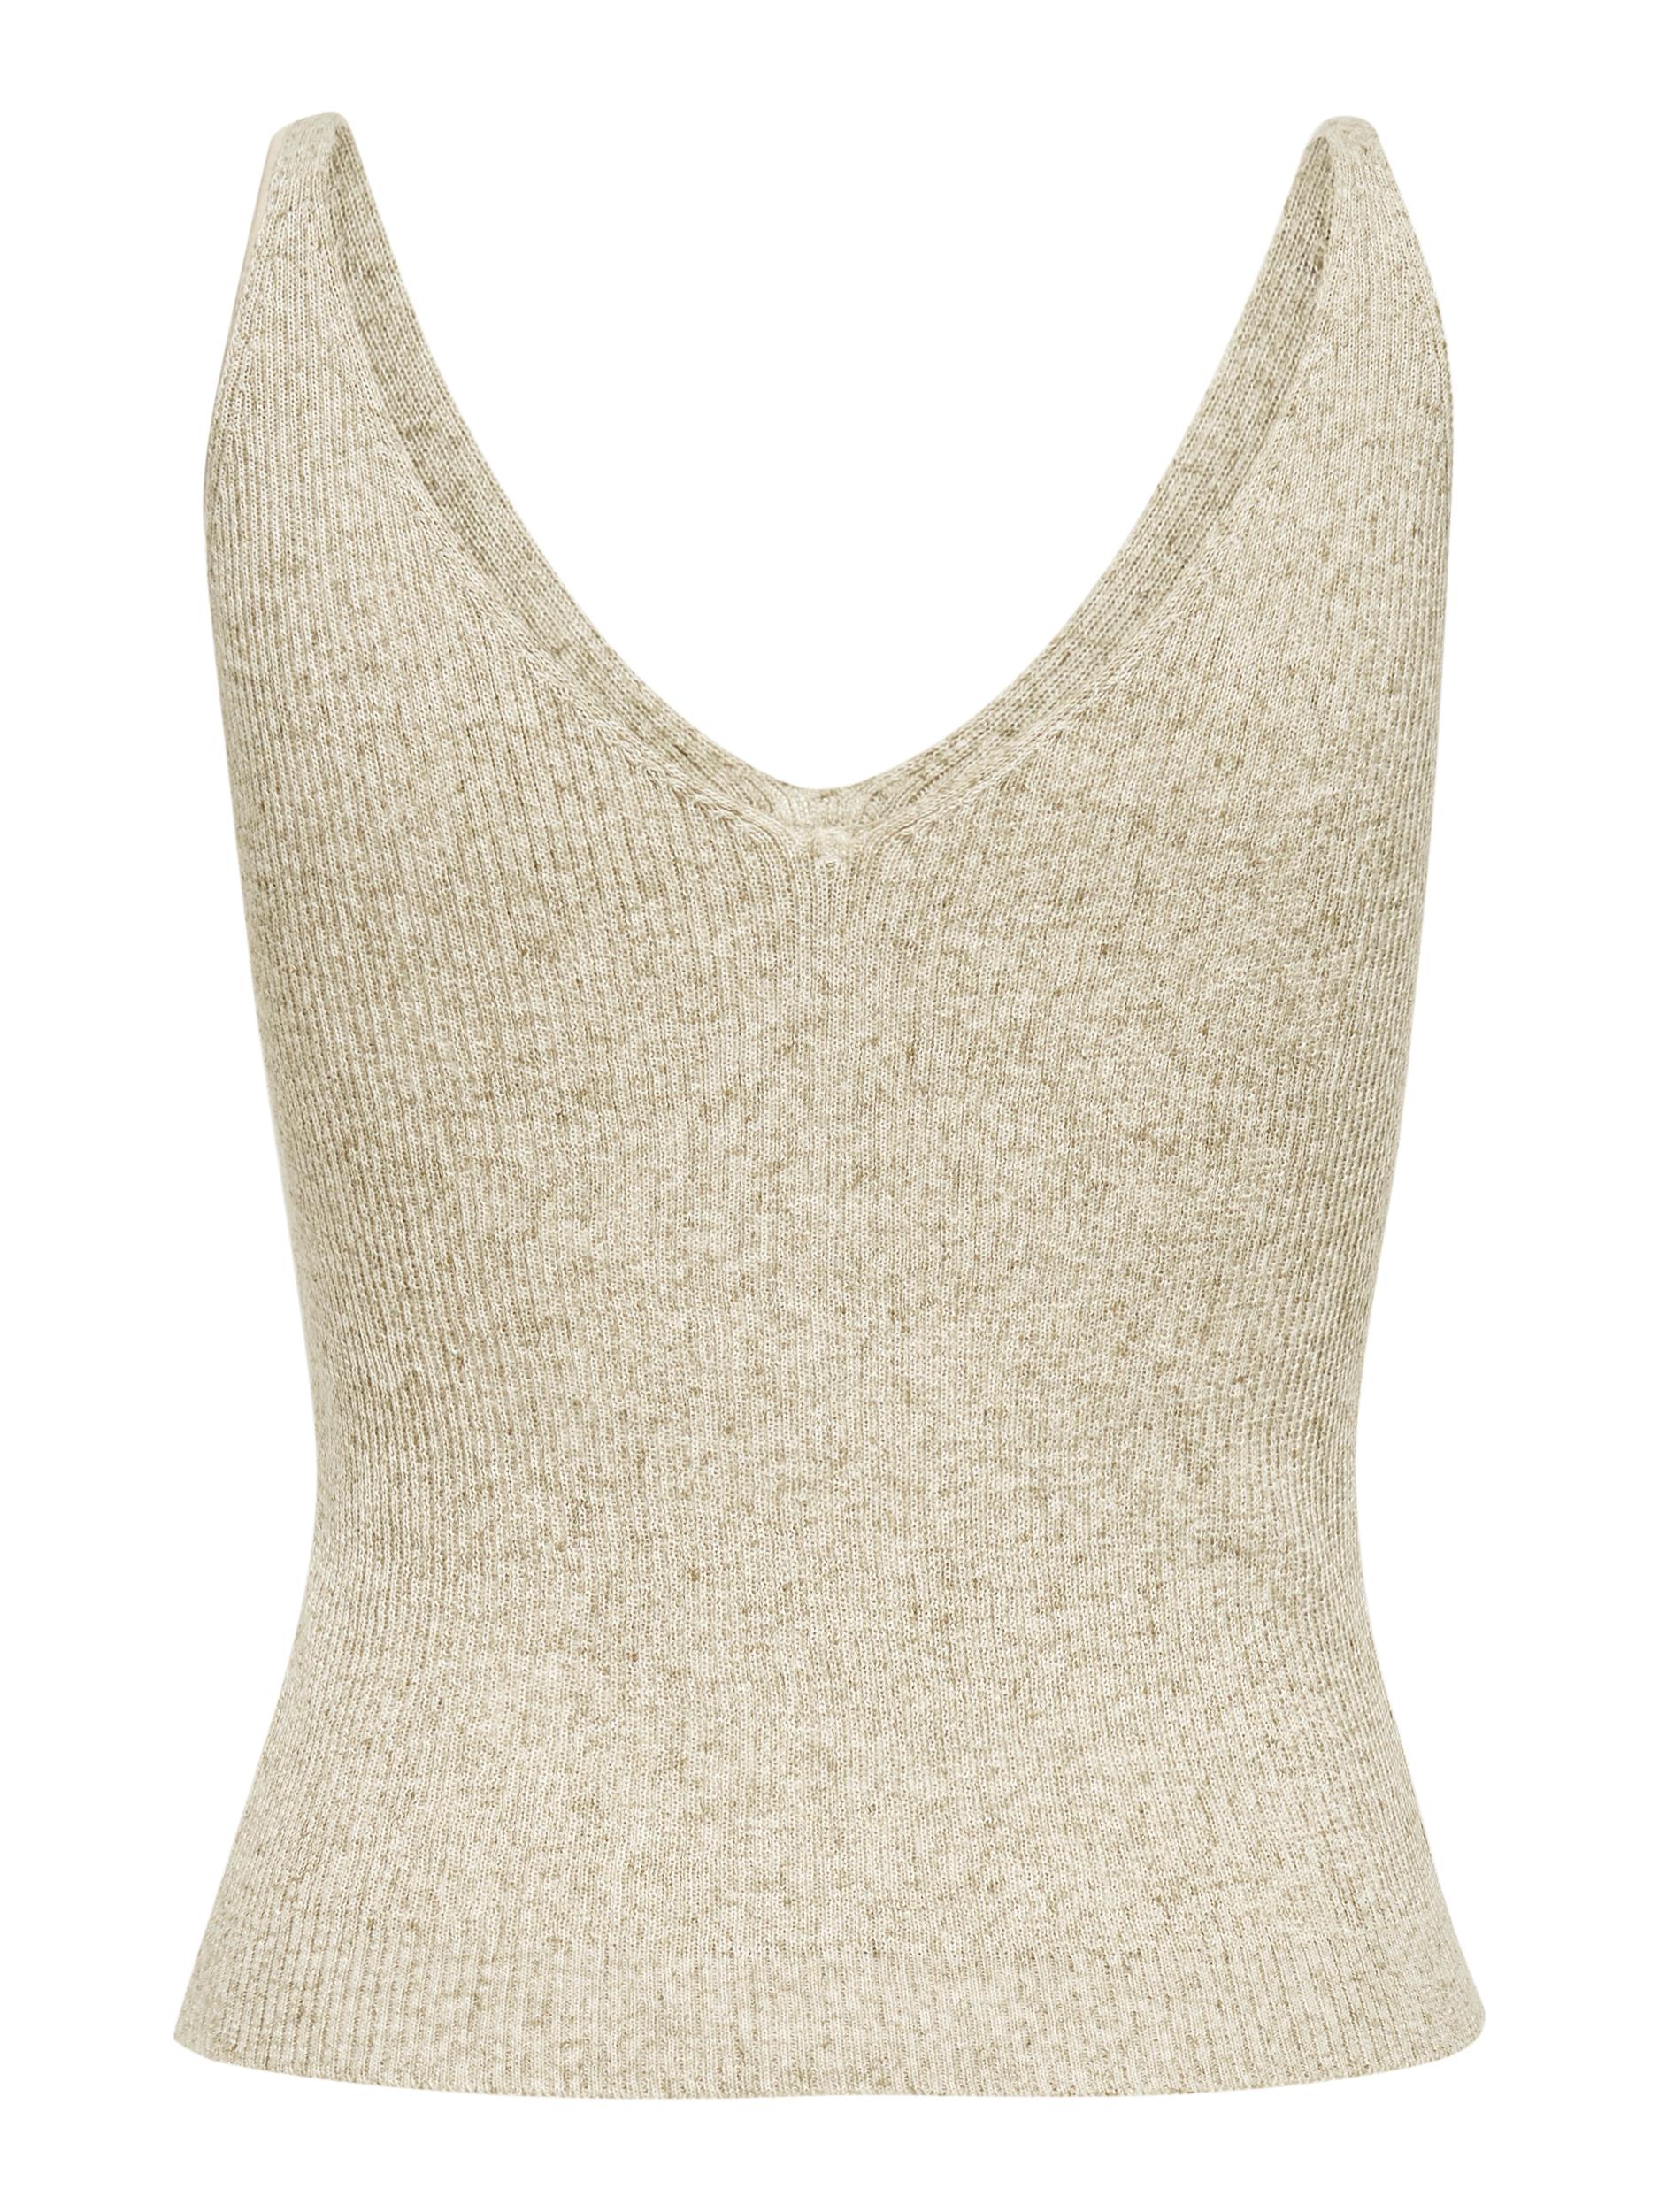 FINAL SALE - Lina front and back V-neckline knitted cami, PUMICE STONE, large